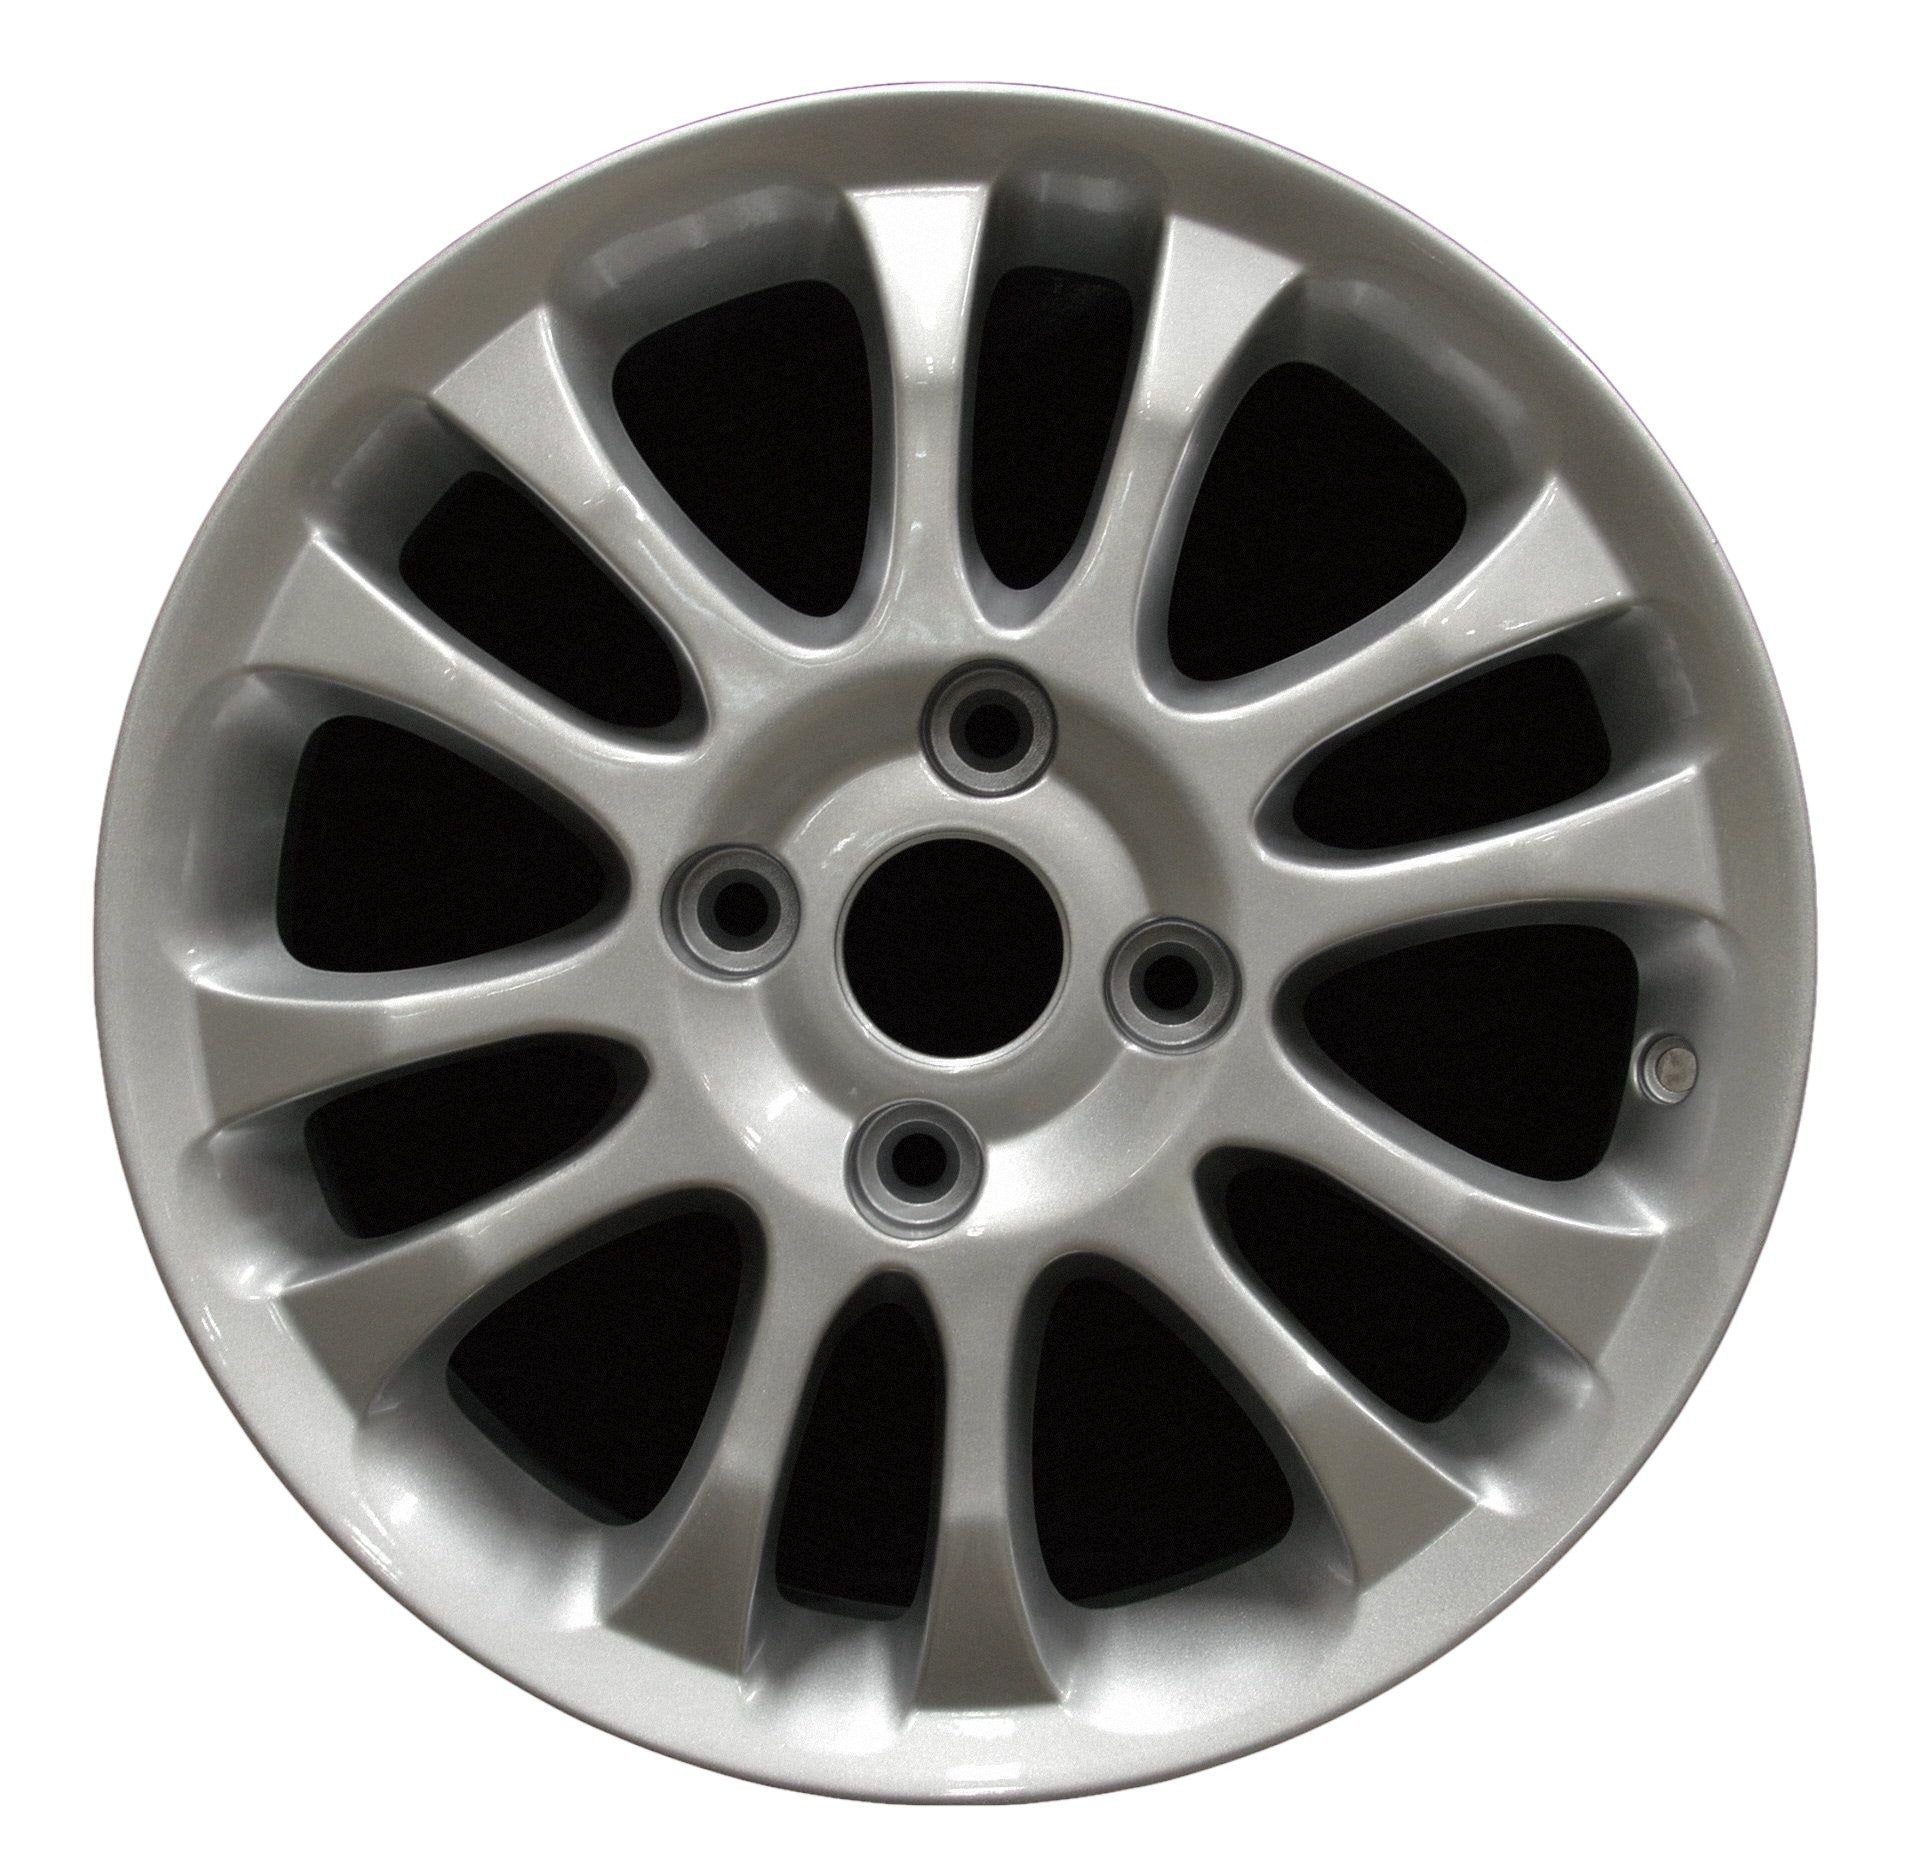 Volvo 40 Series  2003, 2004 Factory OEM Car Wheel Size 16x6.5 Alloy WAO.70259.PS10.FF